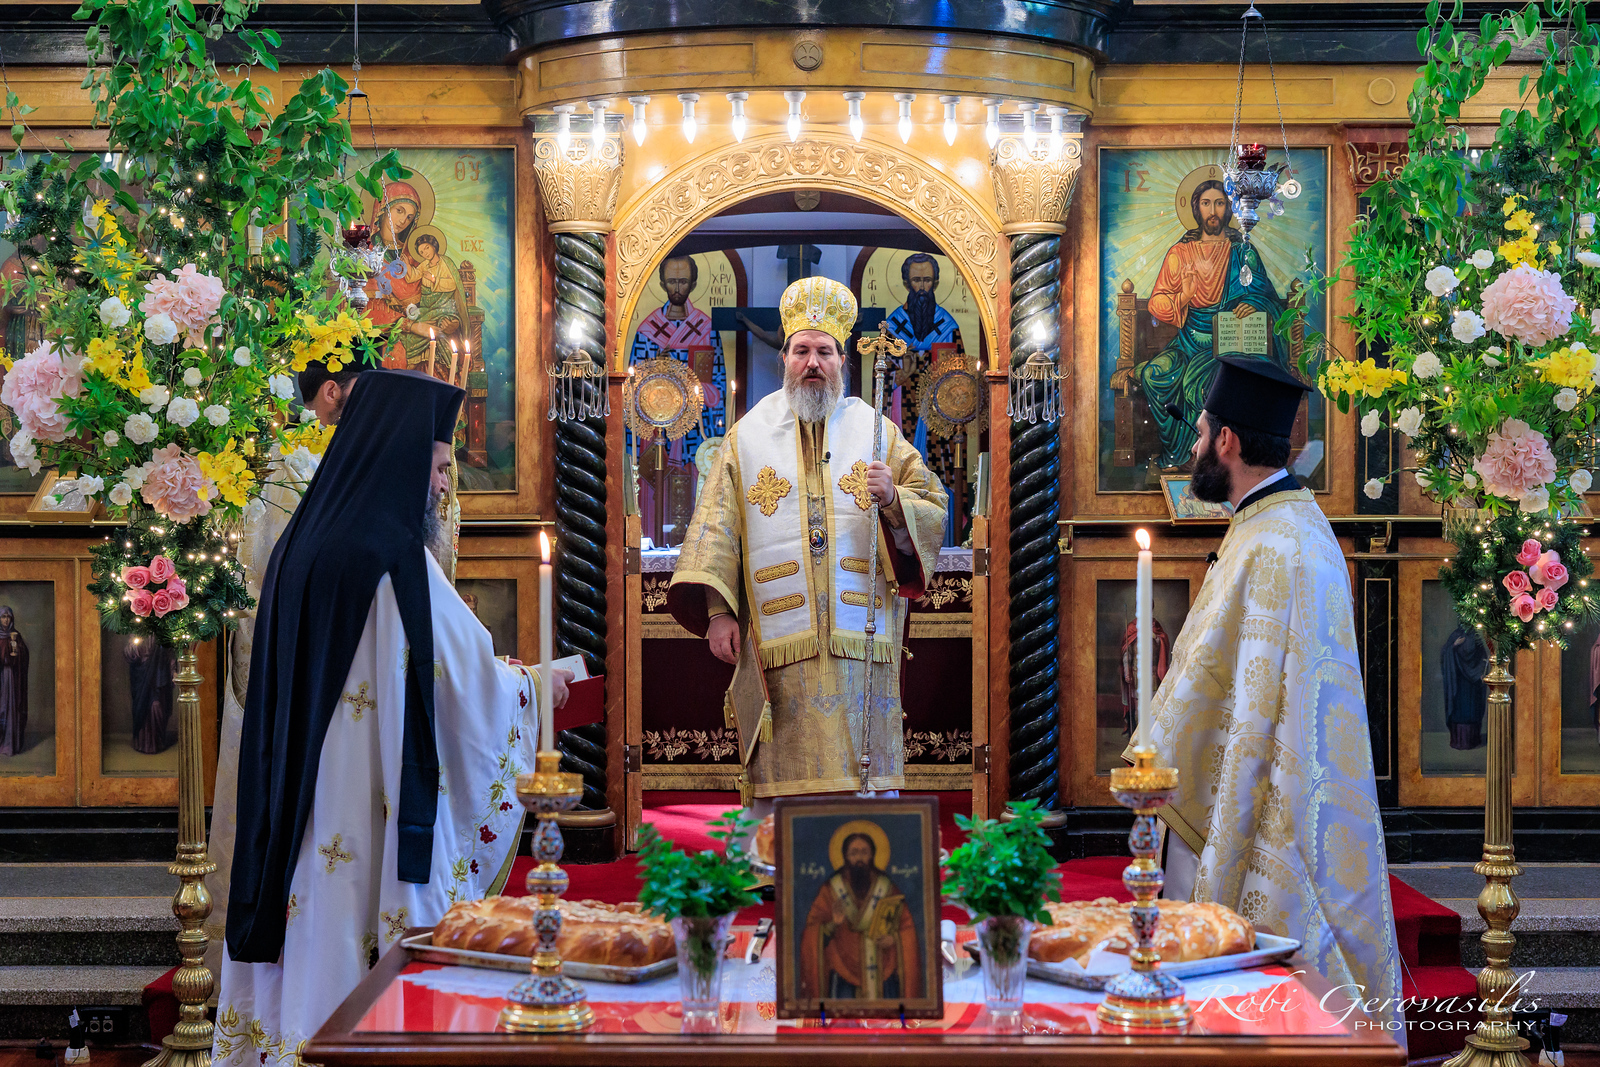 Perth: The Feasts of the Circumcision of Christ and Saint Basil the Great